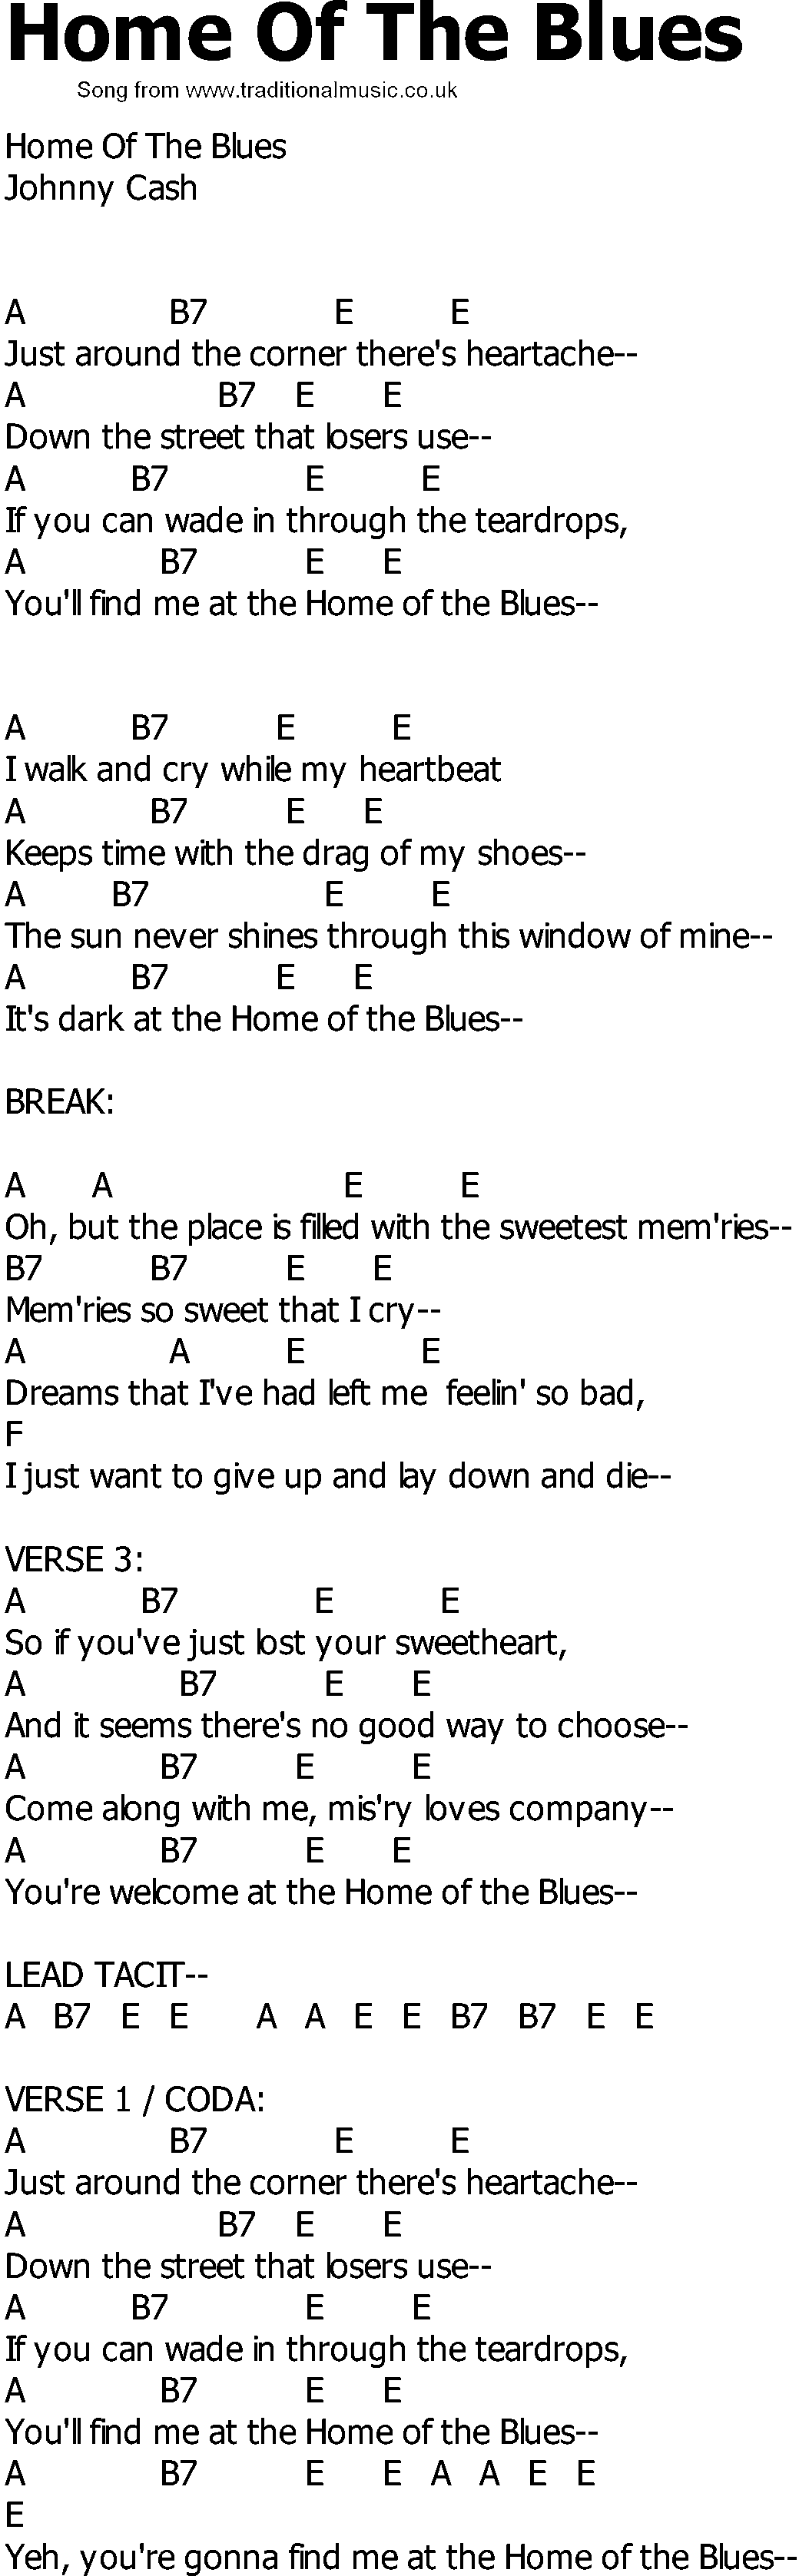 Old Country song lyrics with chords - Home Of The Blues